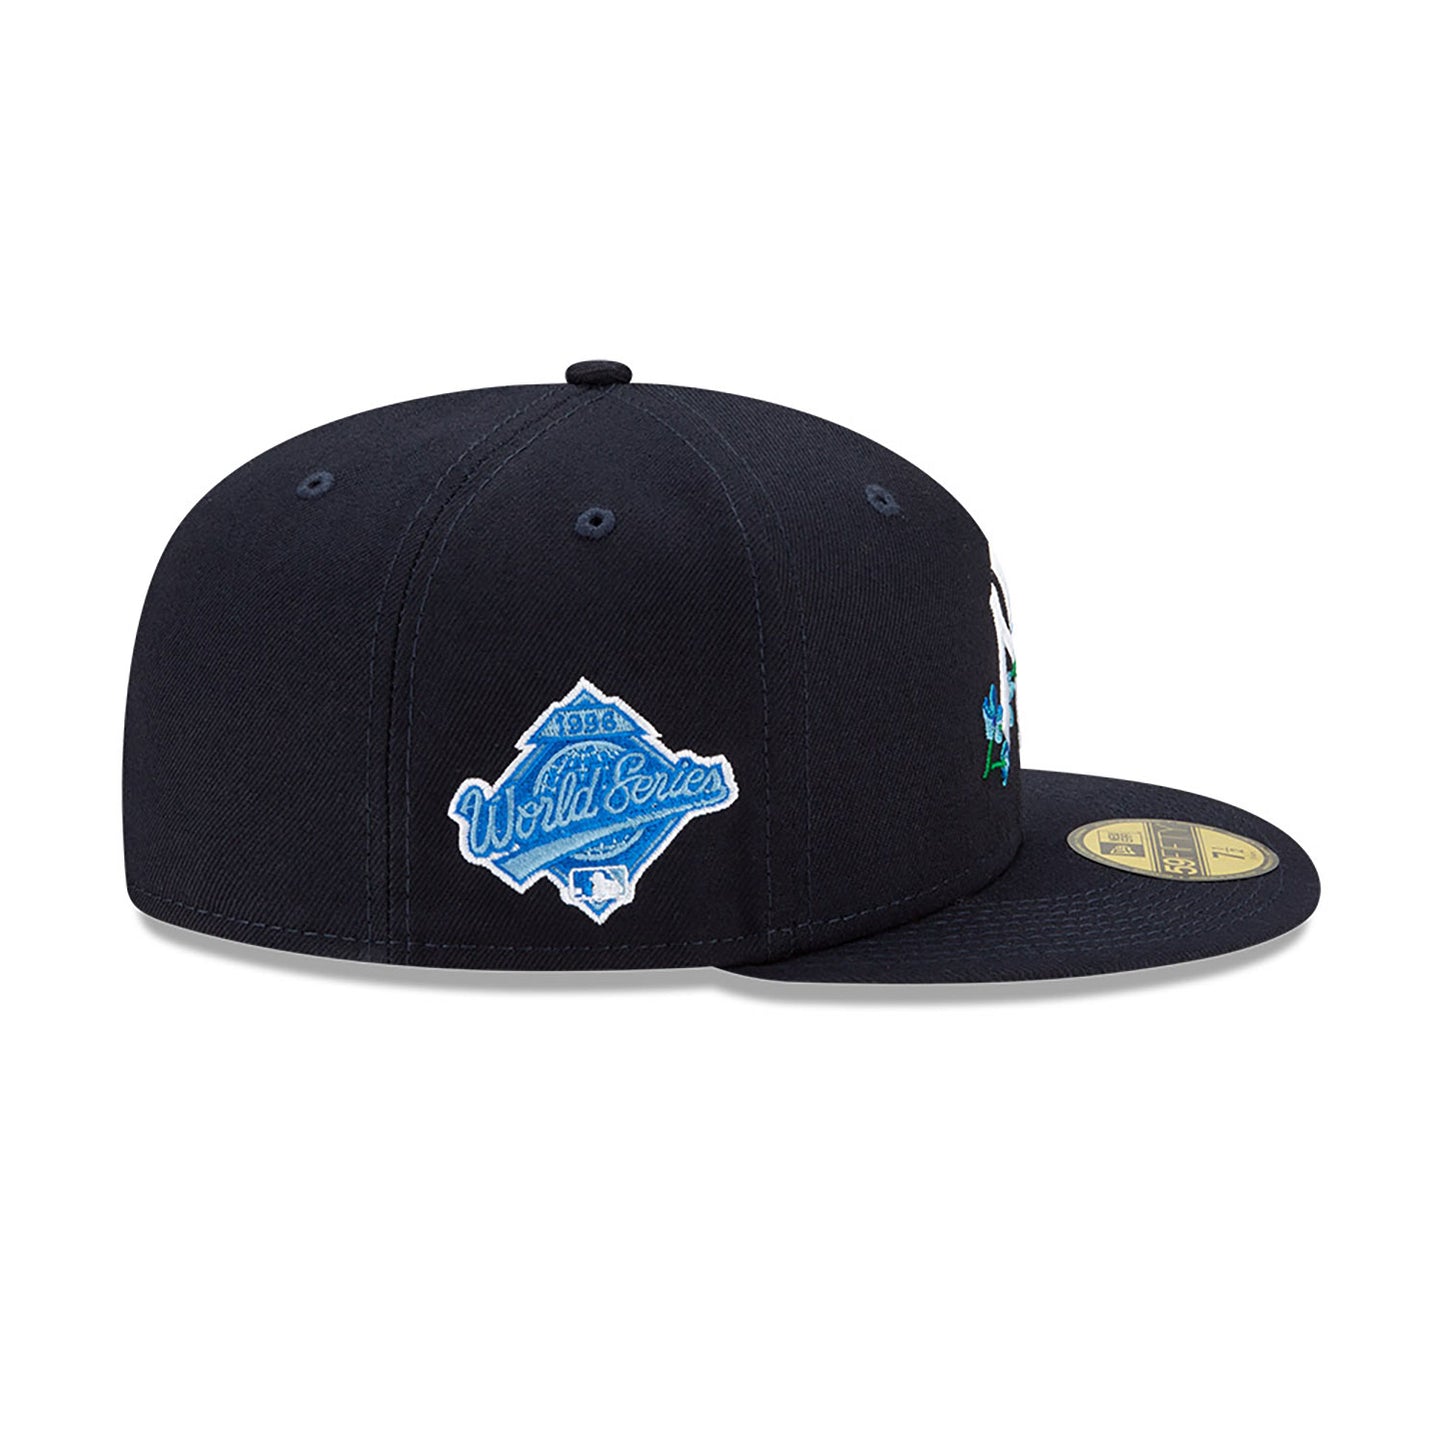 Blue flower NYC fitted sp